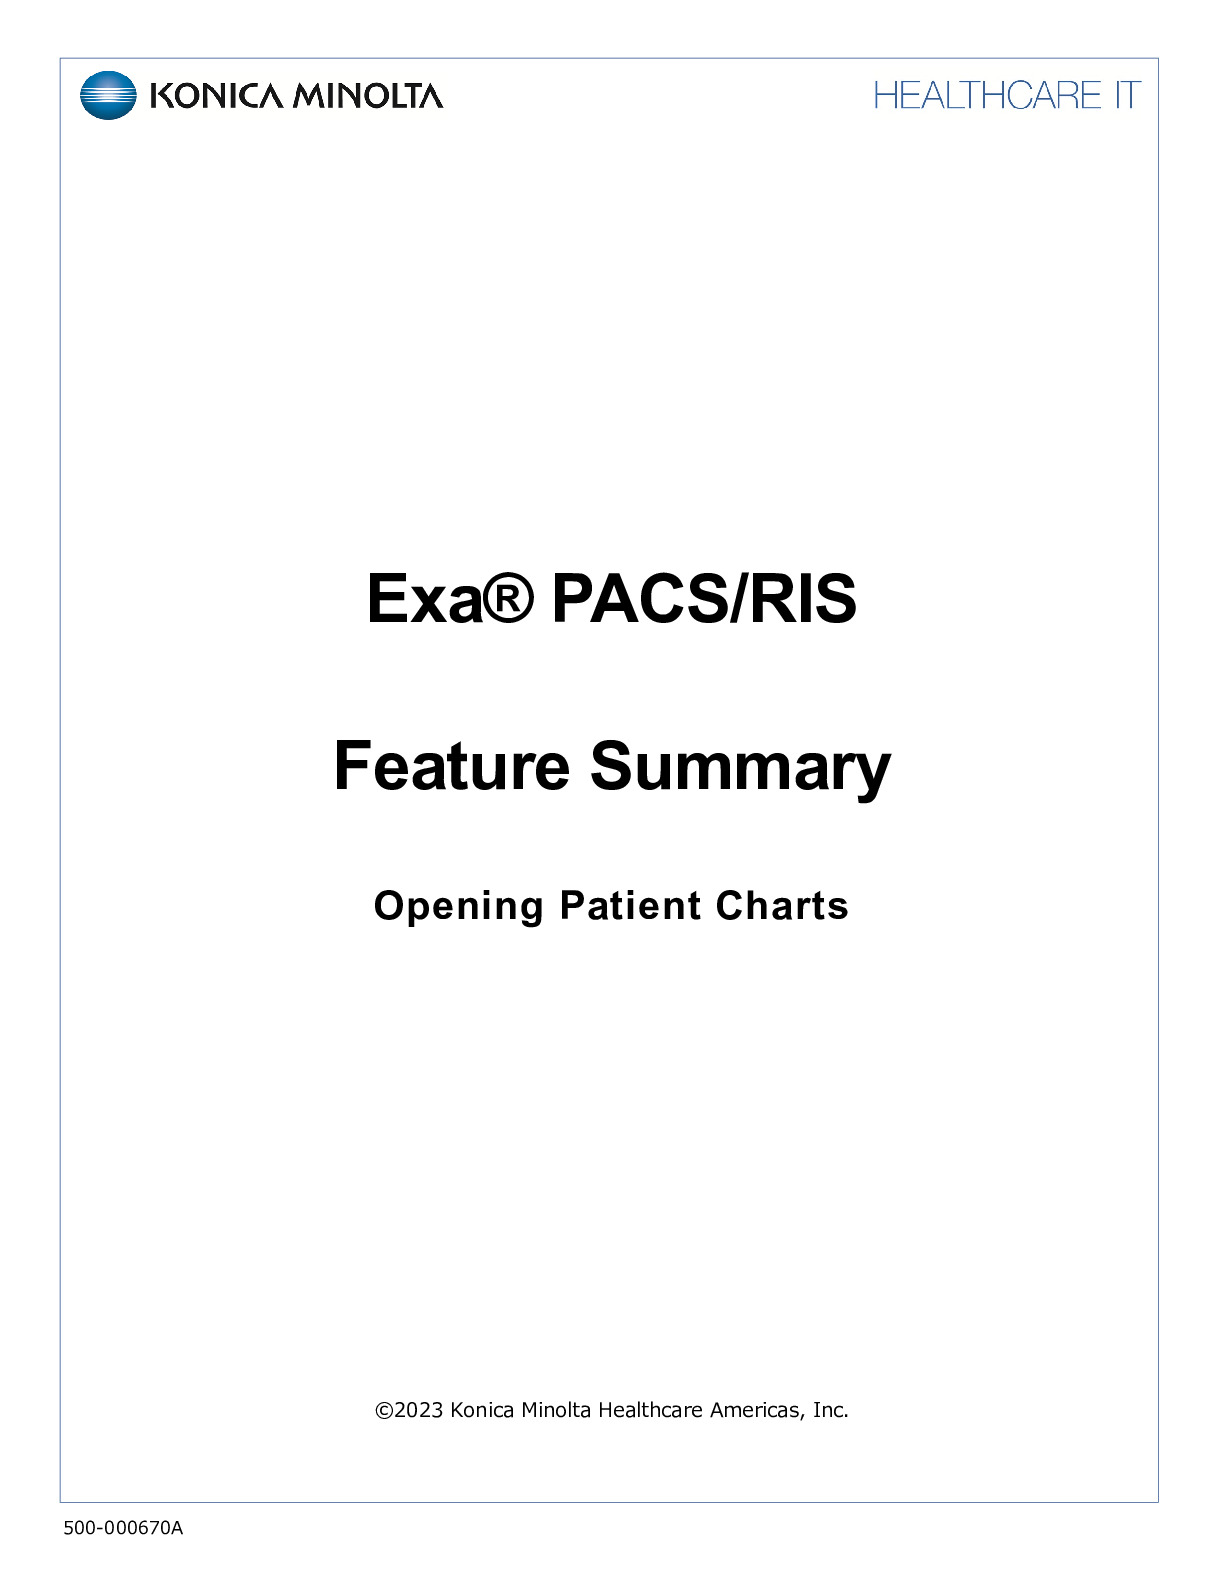 500-000670A EPR_FS_Opening_patient_charts